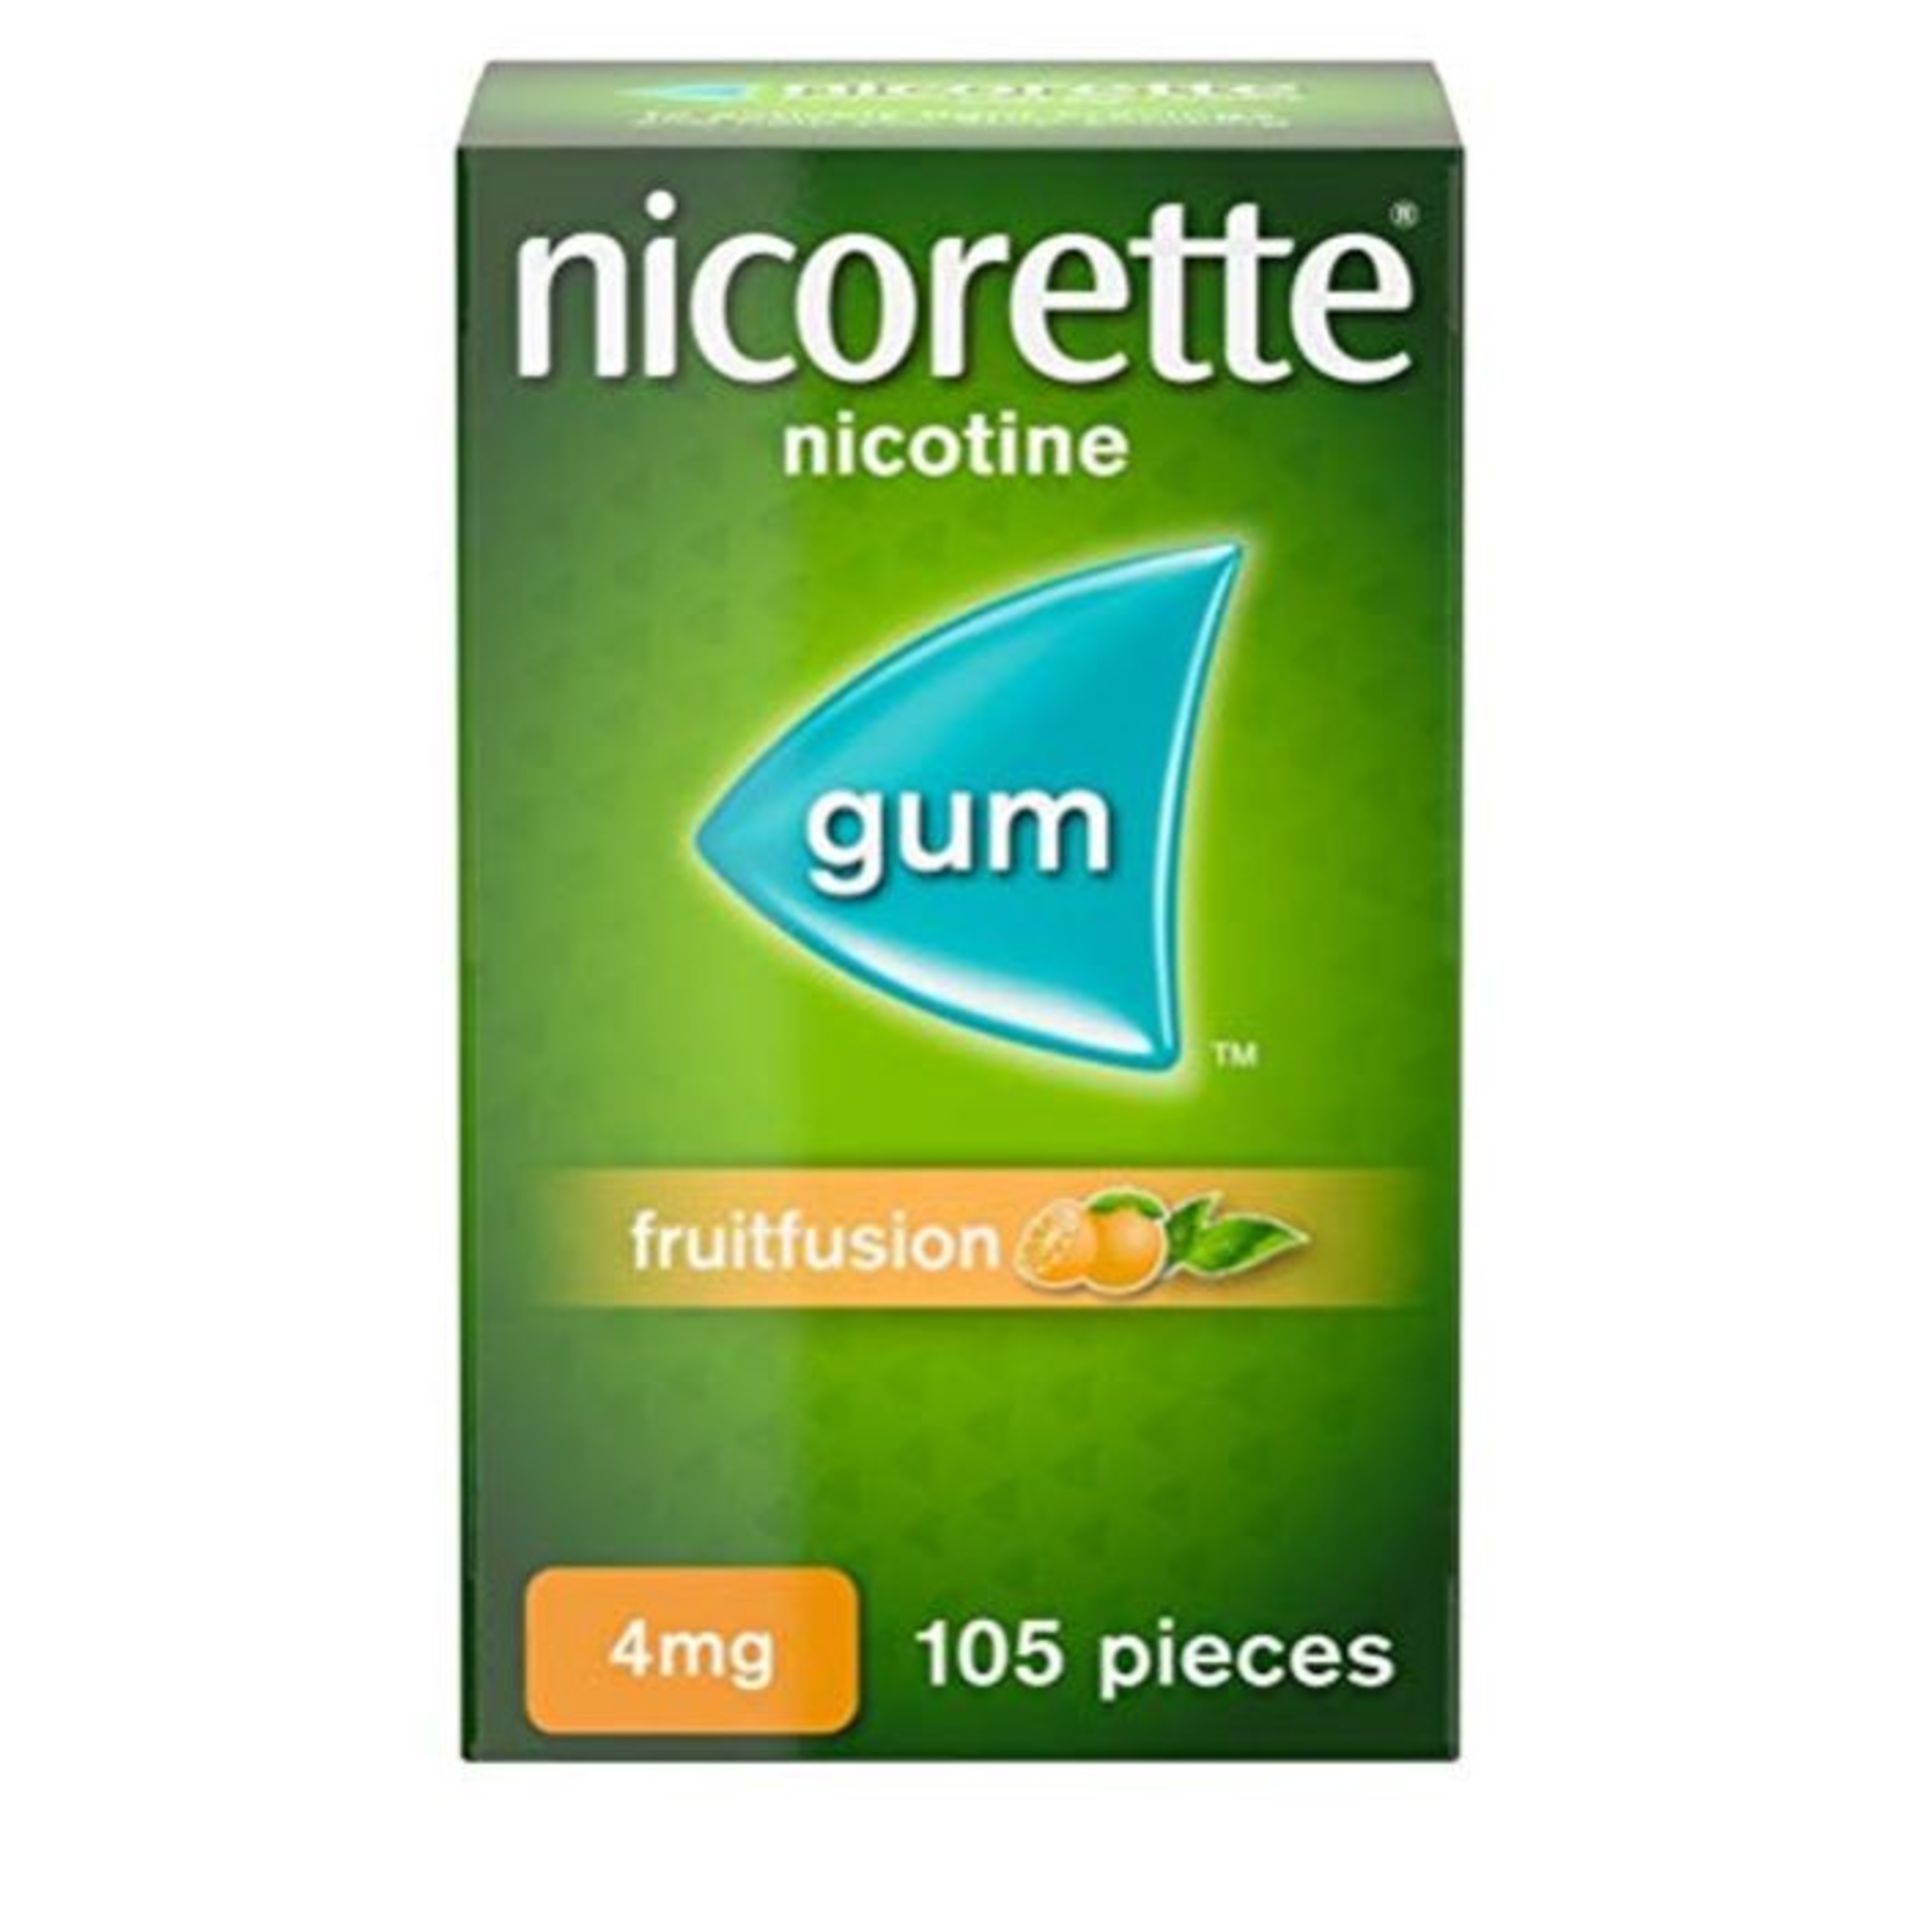 Nicorette Fruit Fusion Chewing Gum, 4 mg, 105 Pieces (Quit Smoking & Stop Smoking Aid)